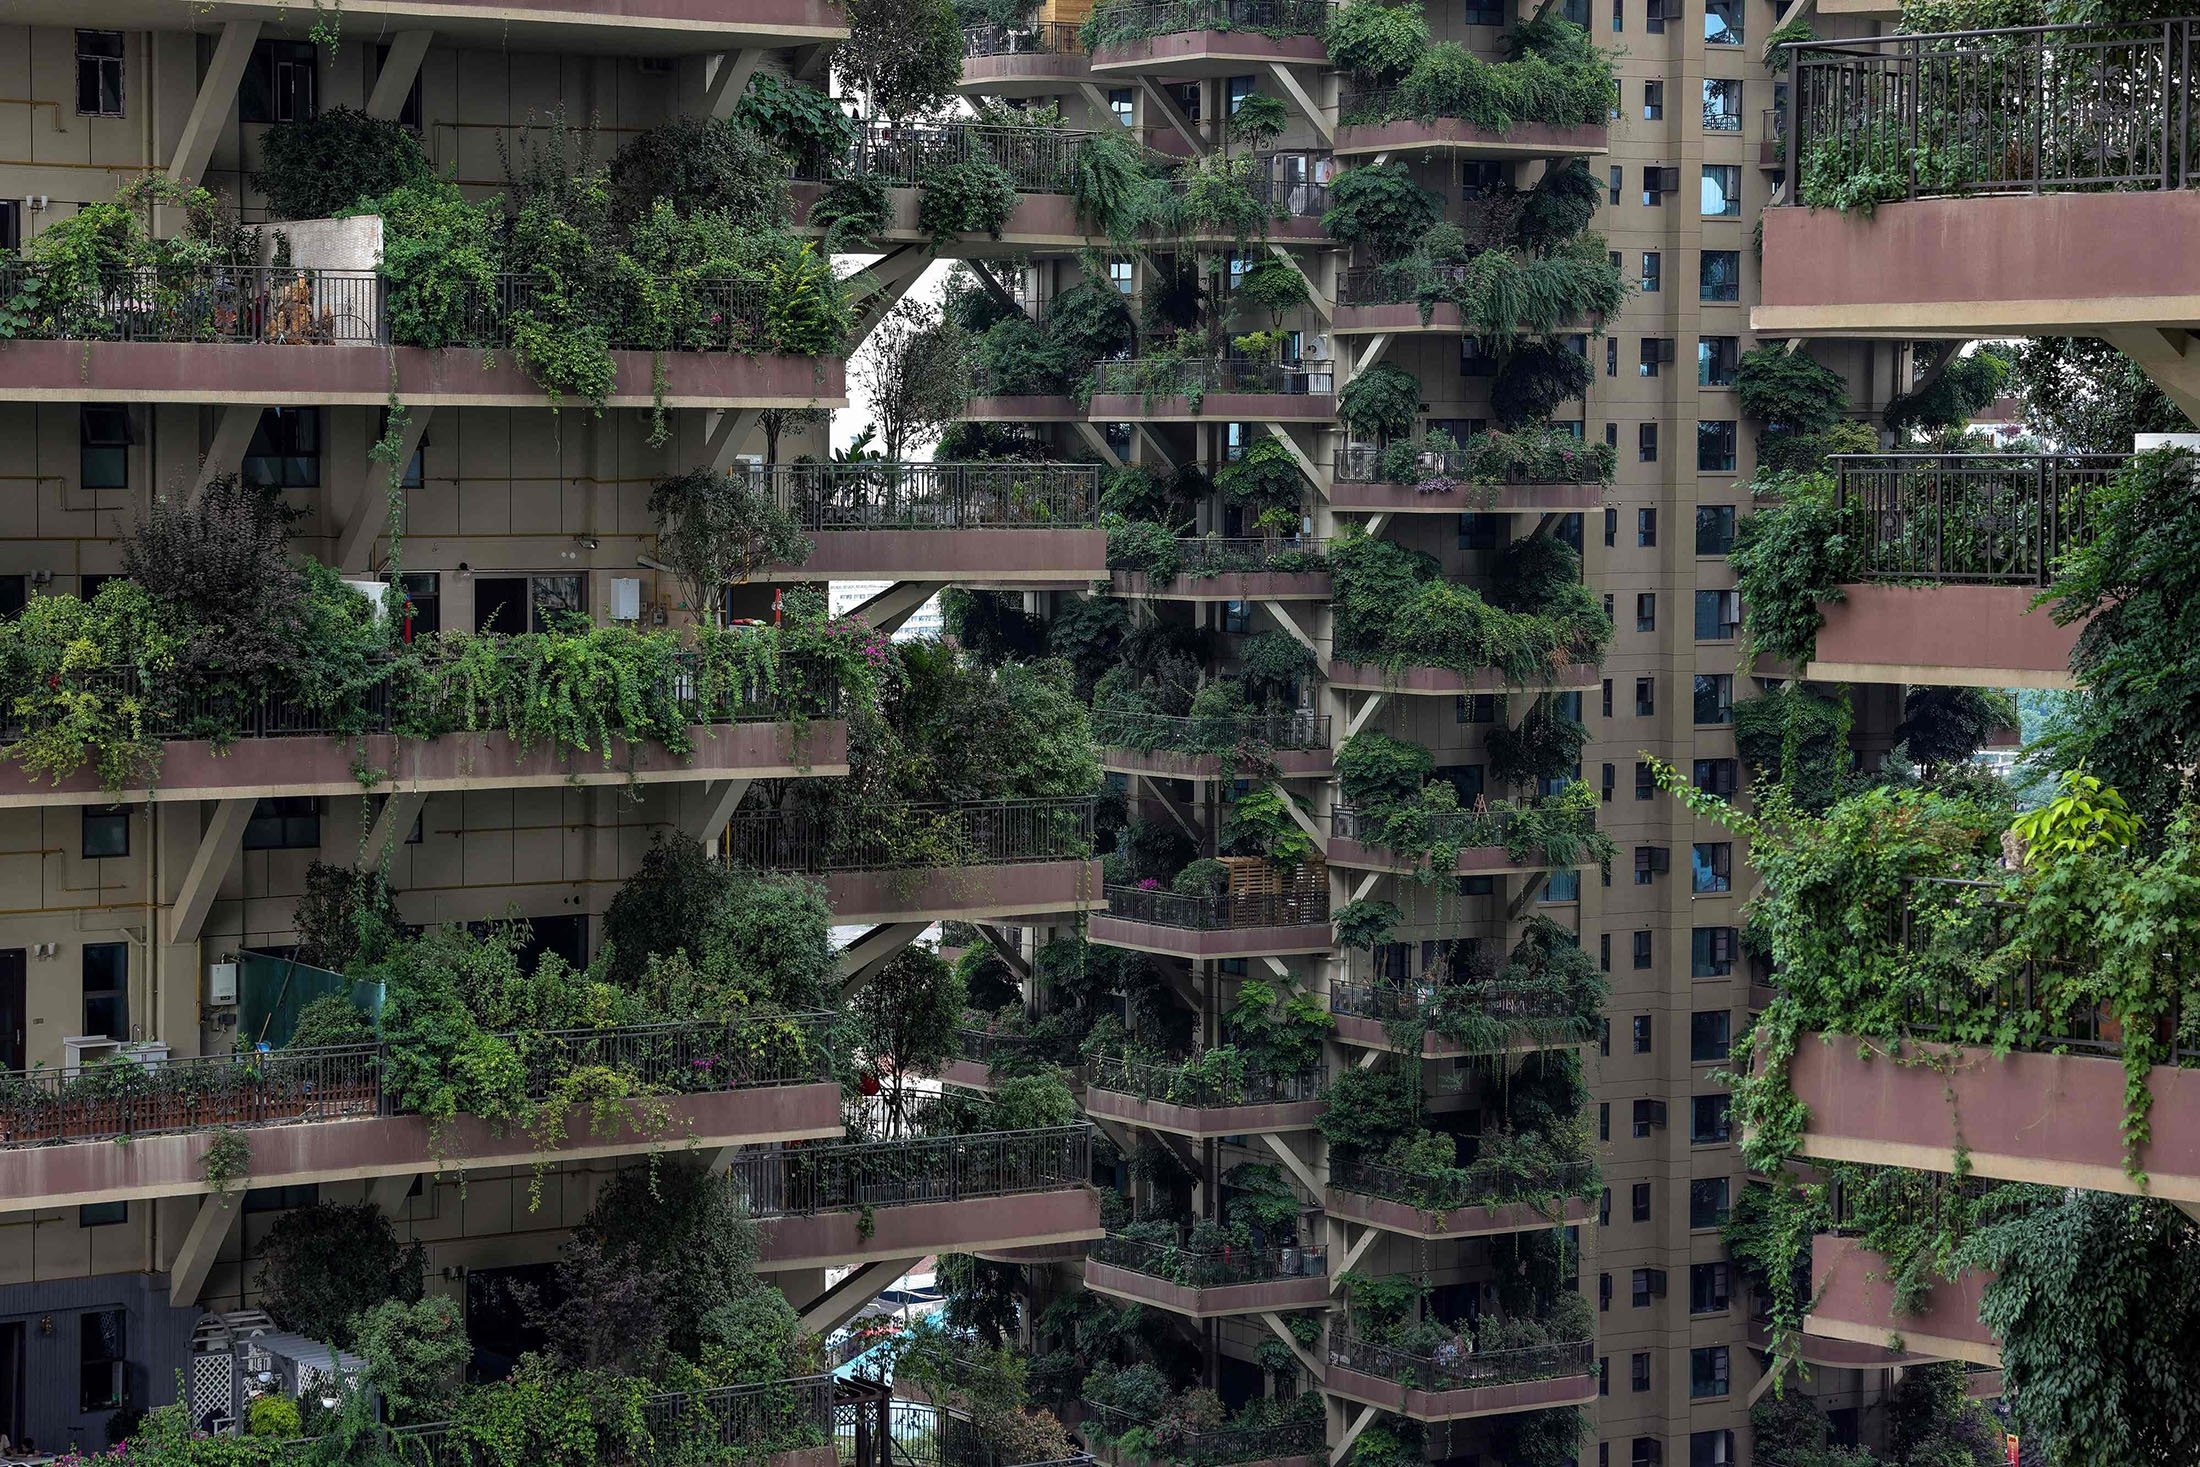 Apartments with balconies covered with plants at a residential community can be seen in Chengdu in China